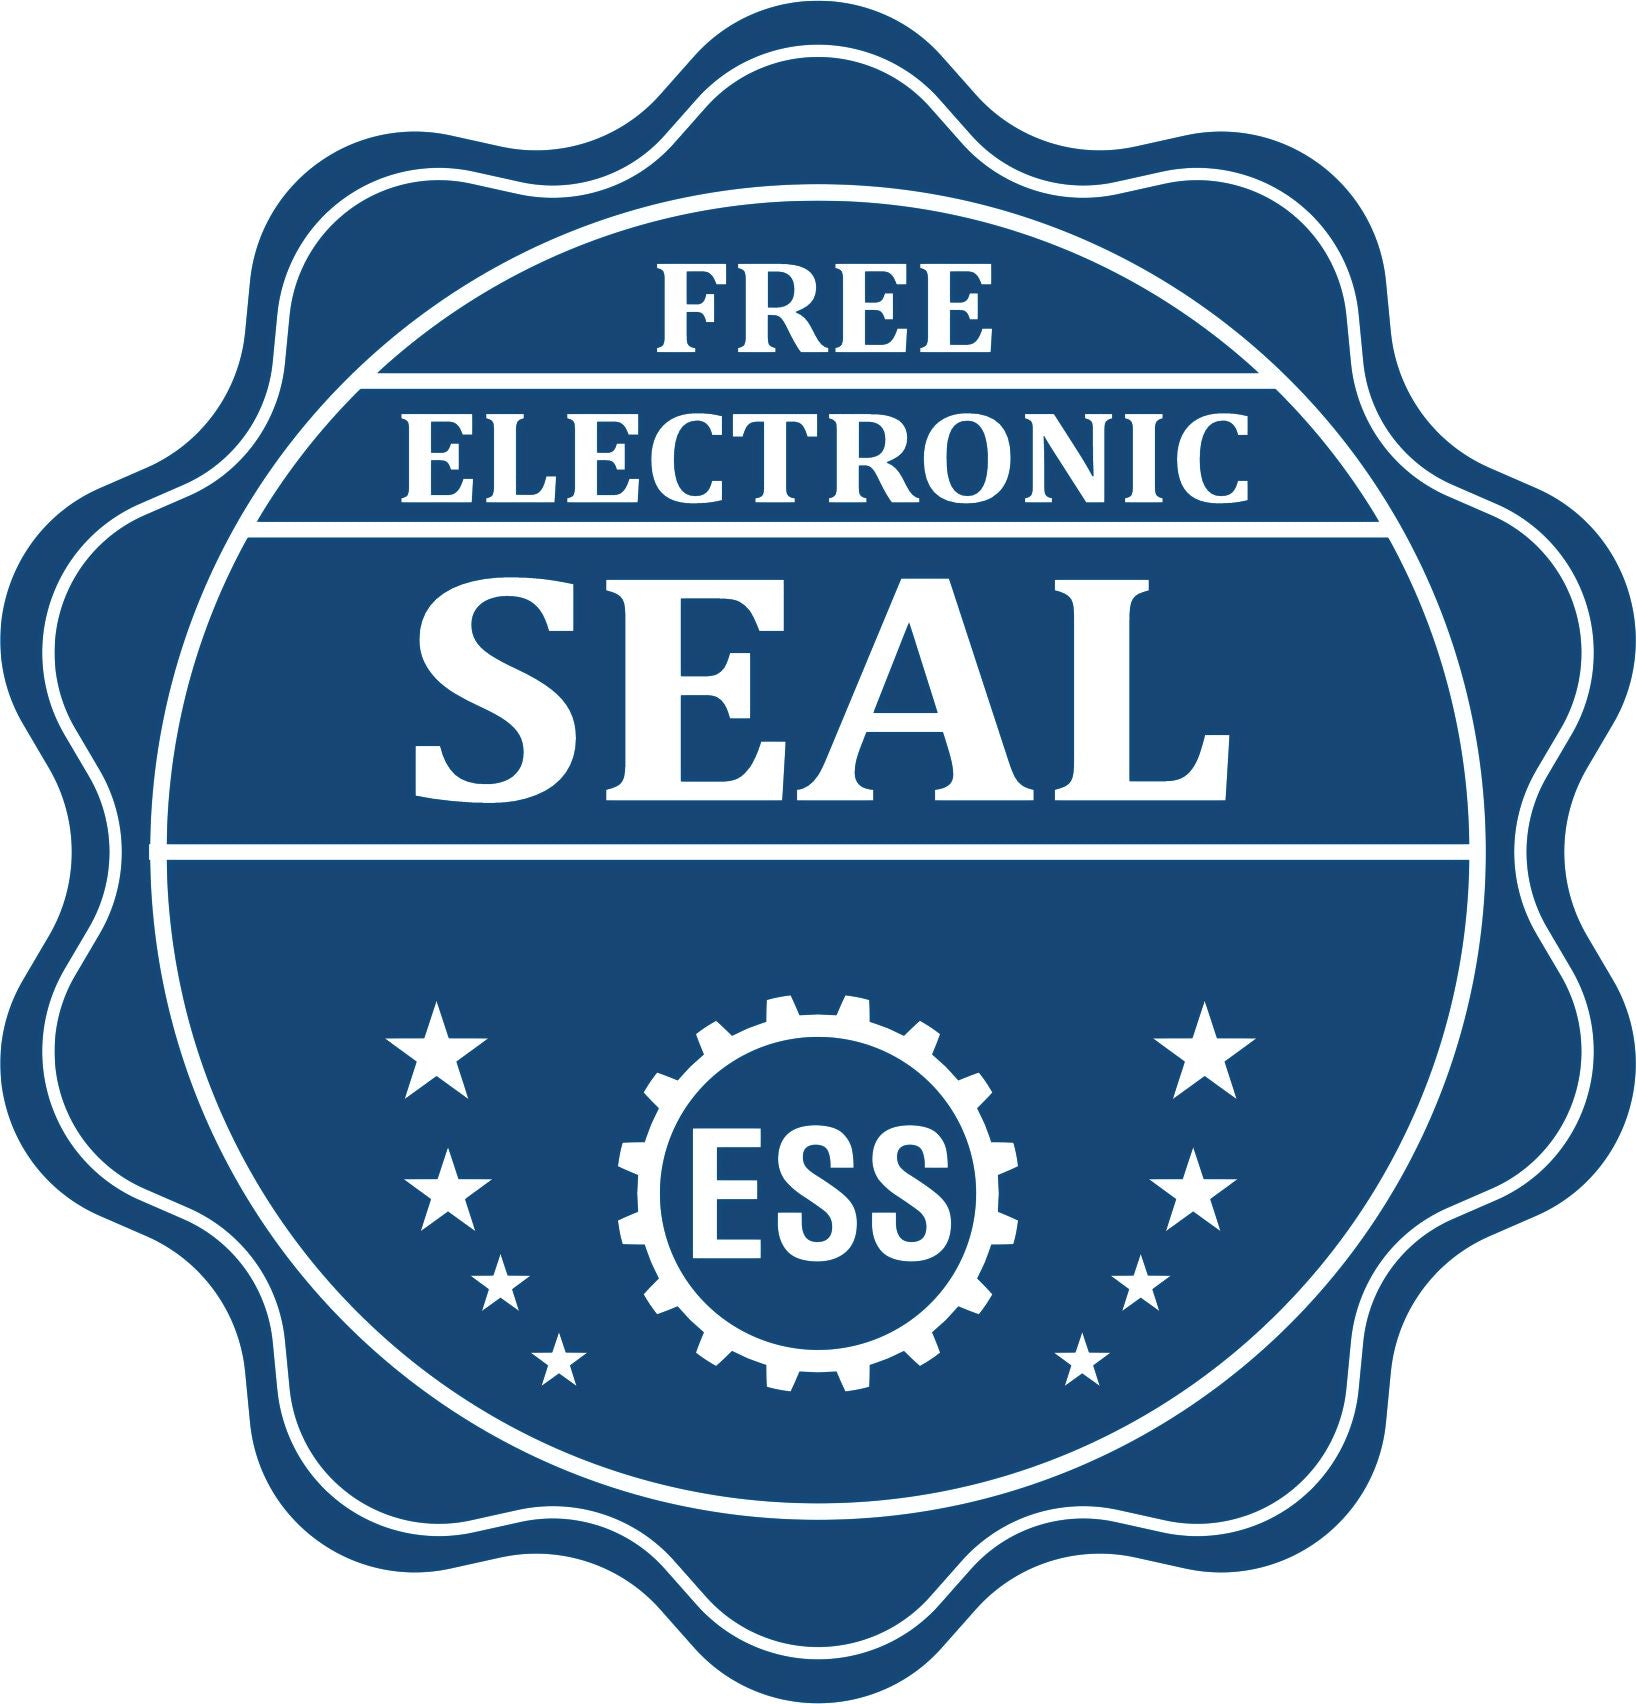 A badge showing a free electronic seal for the Premium MaxLight Pre-Inked Georgia Engineering Stamp with stars and the ESS gear on the emblem.